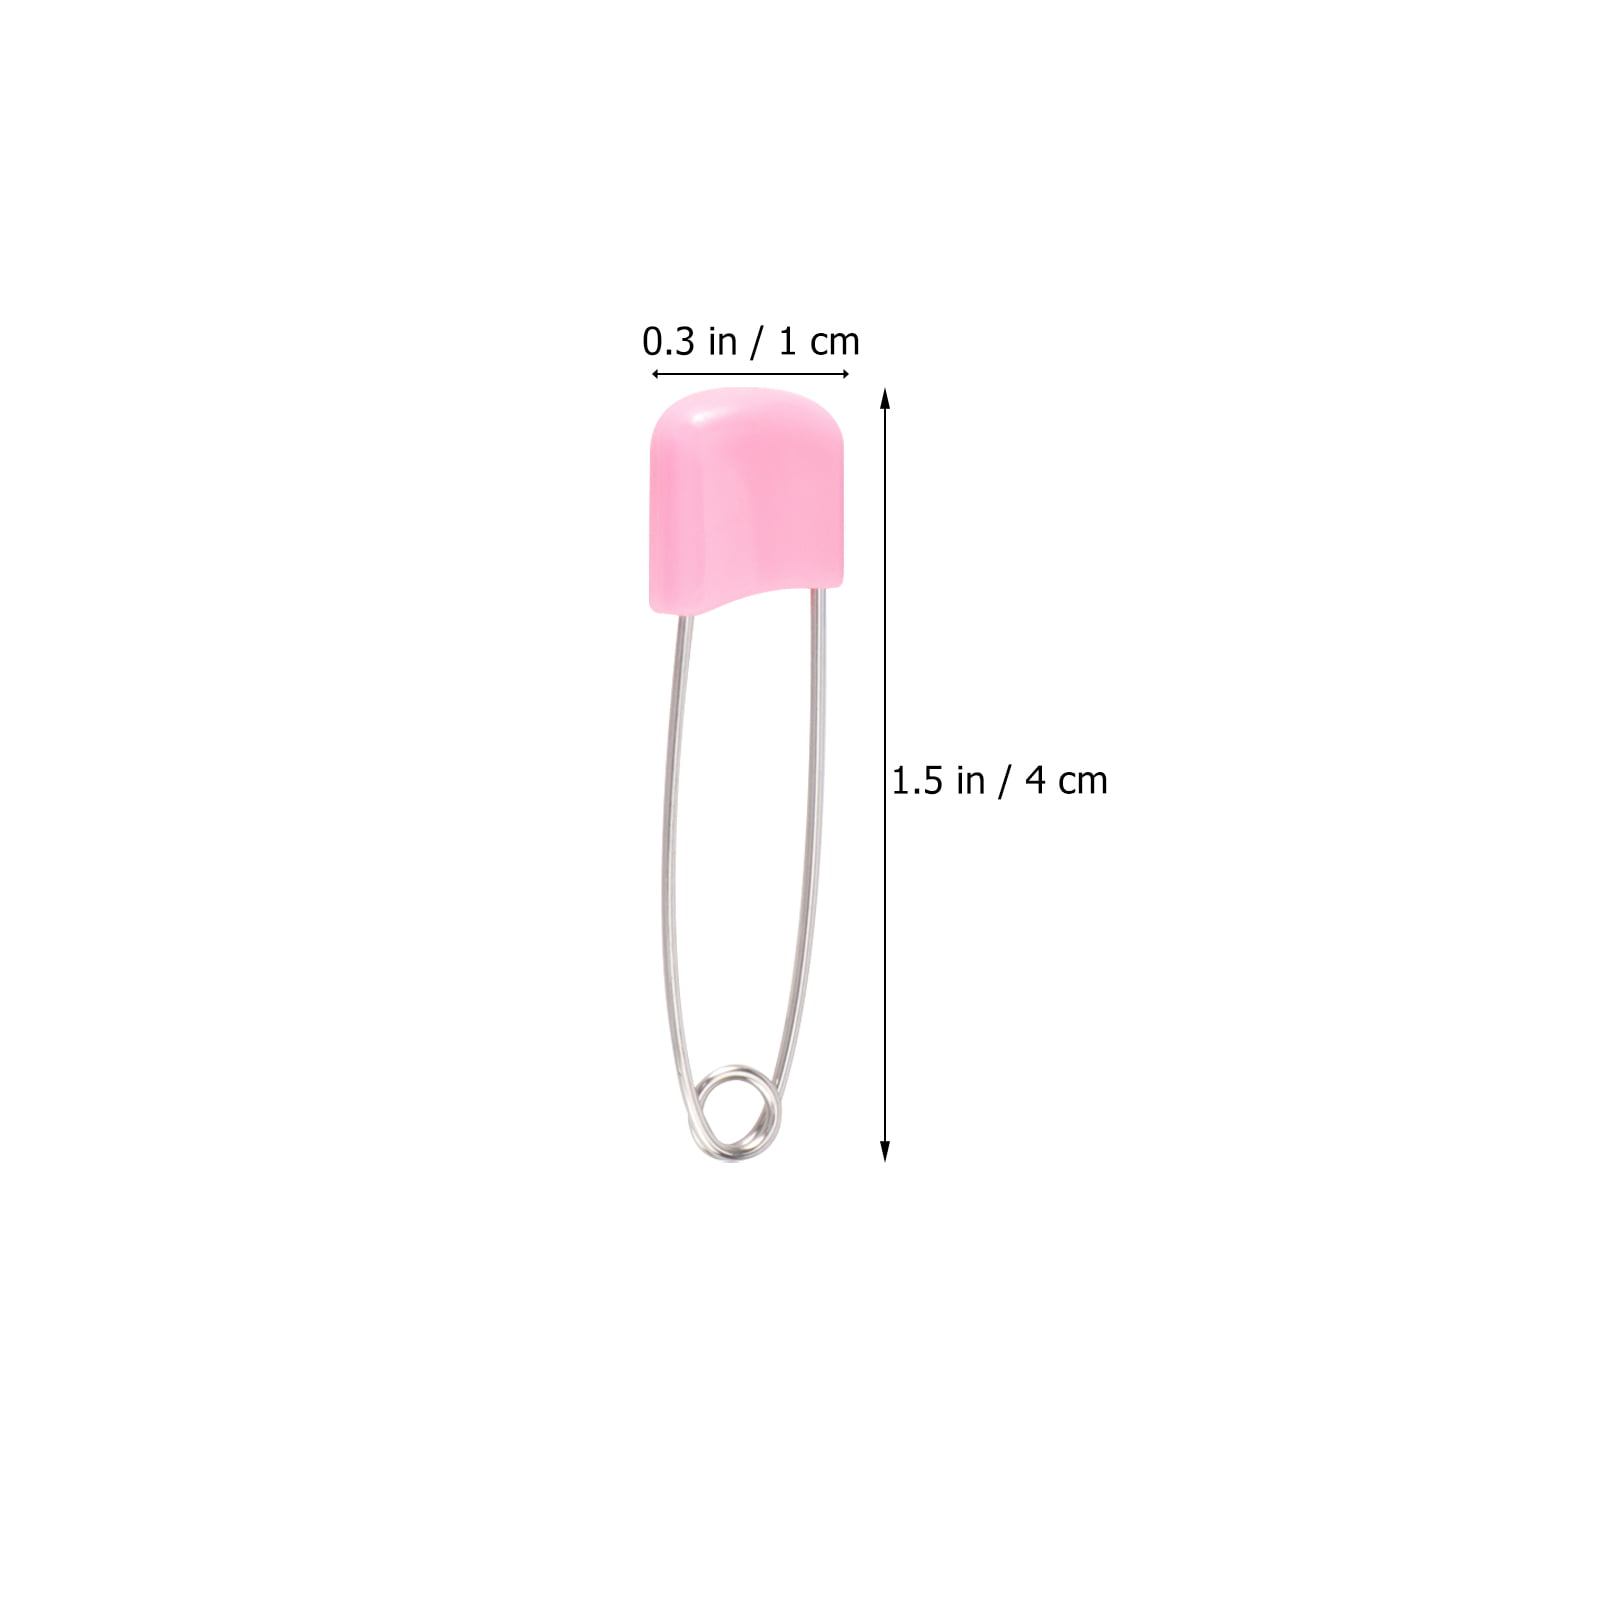 2 pack of 4 Vintage Baby Safety Pins pink stainless steel New